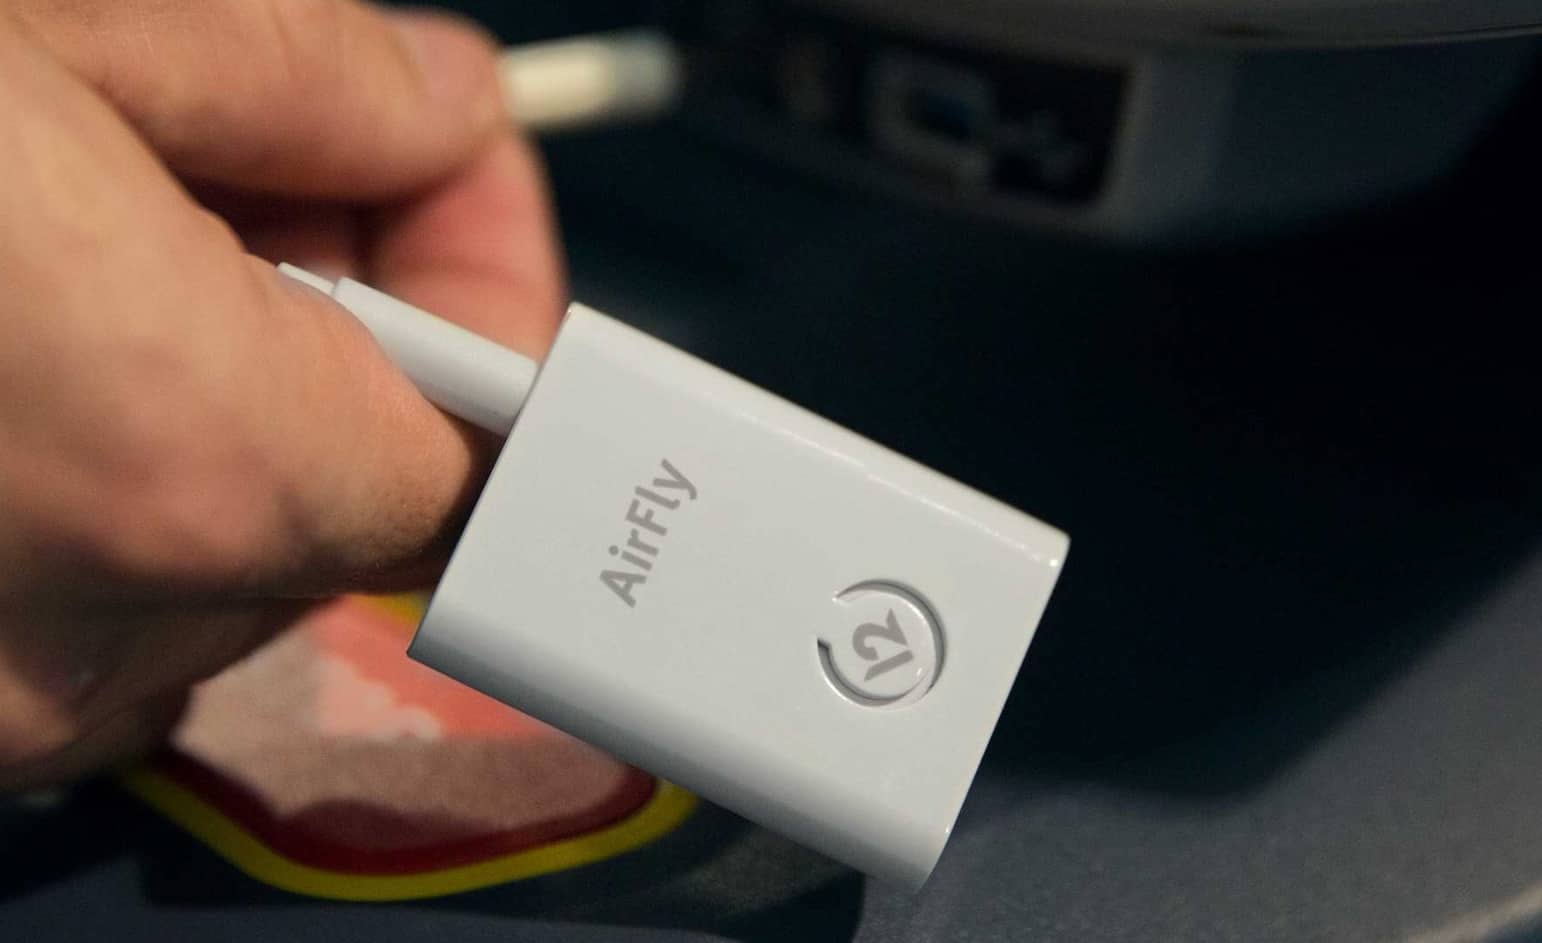 AirFly lets you connect your AirPods to almost anything